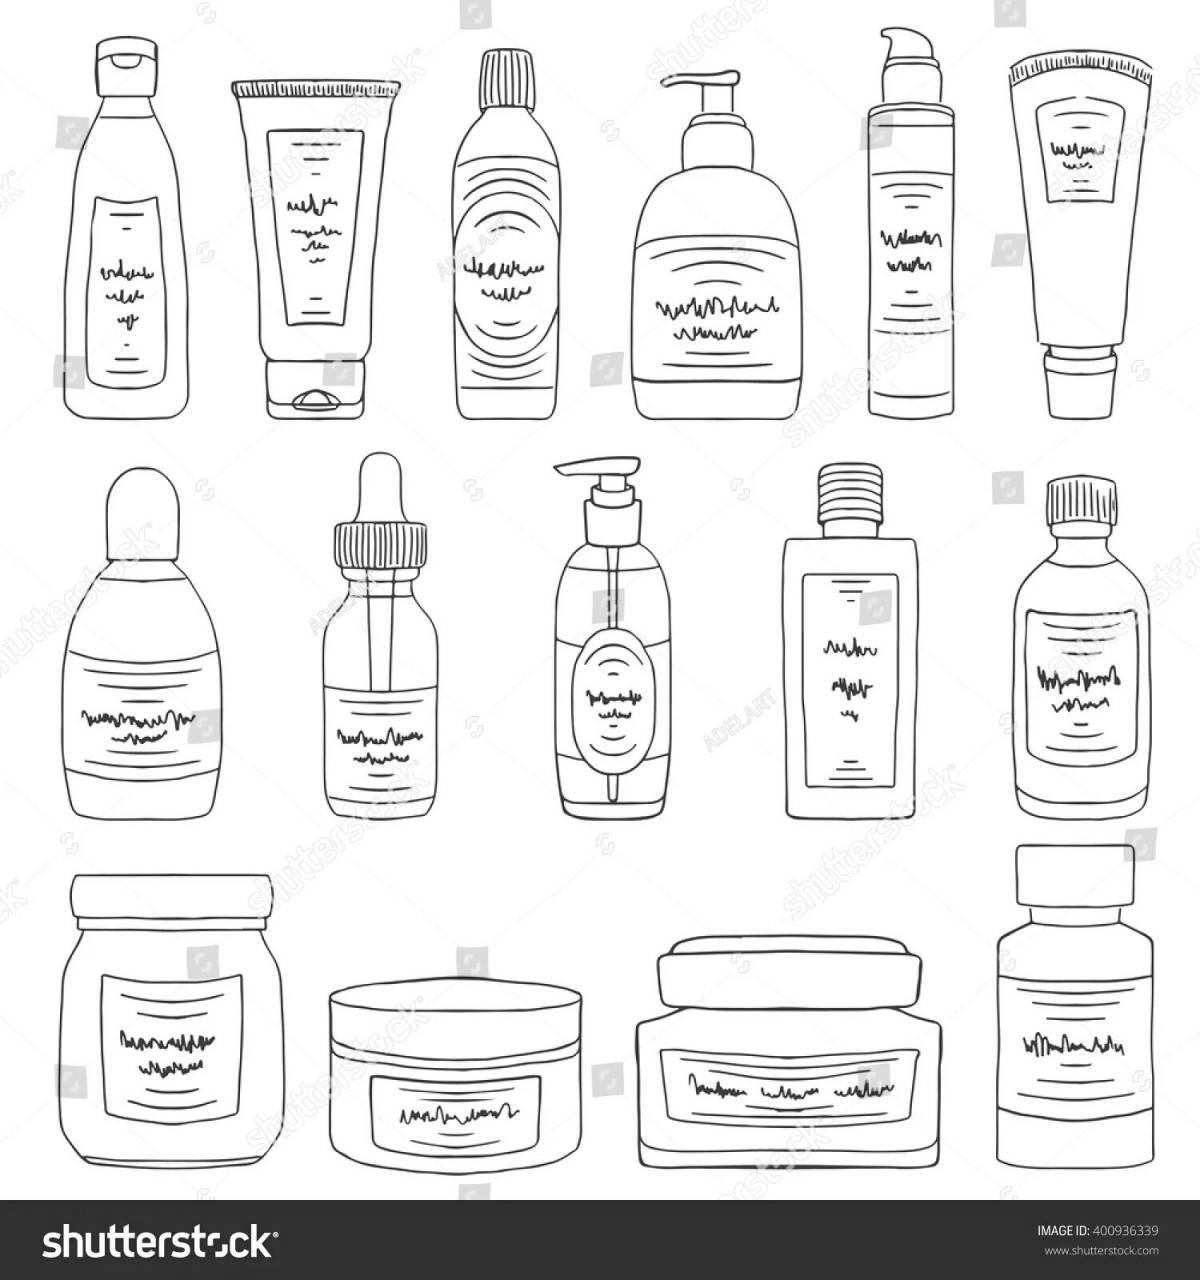 Coloring page incredible skin care cosmetics